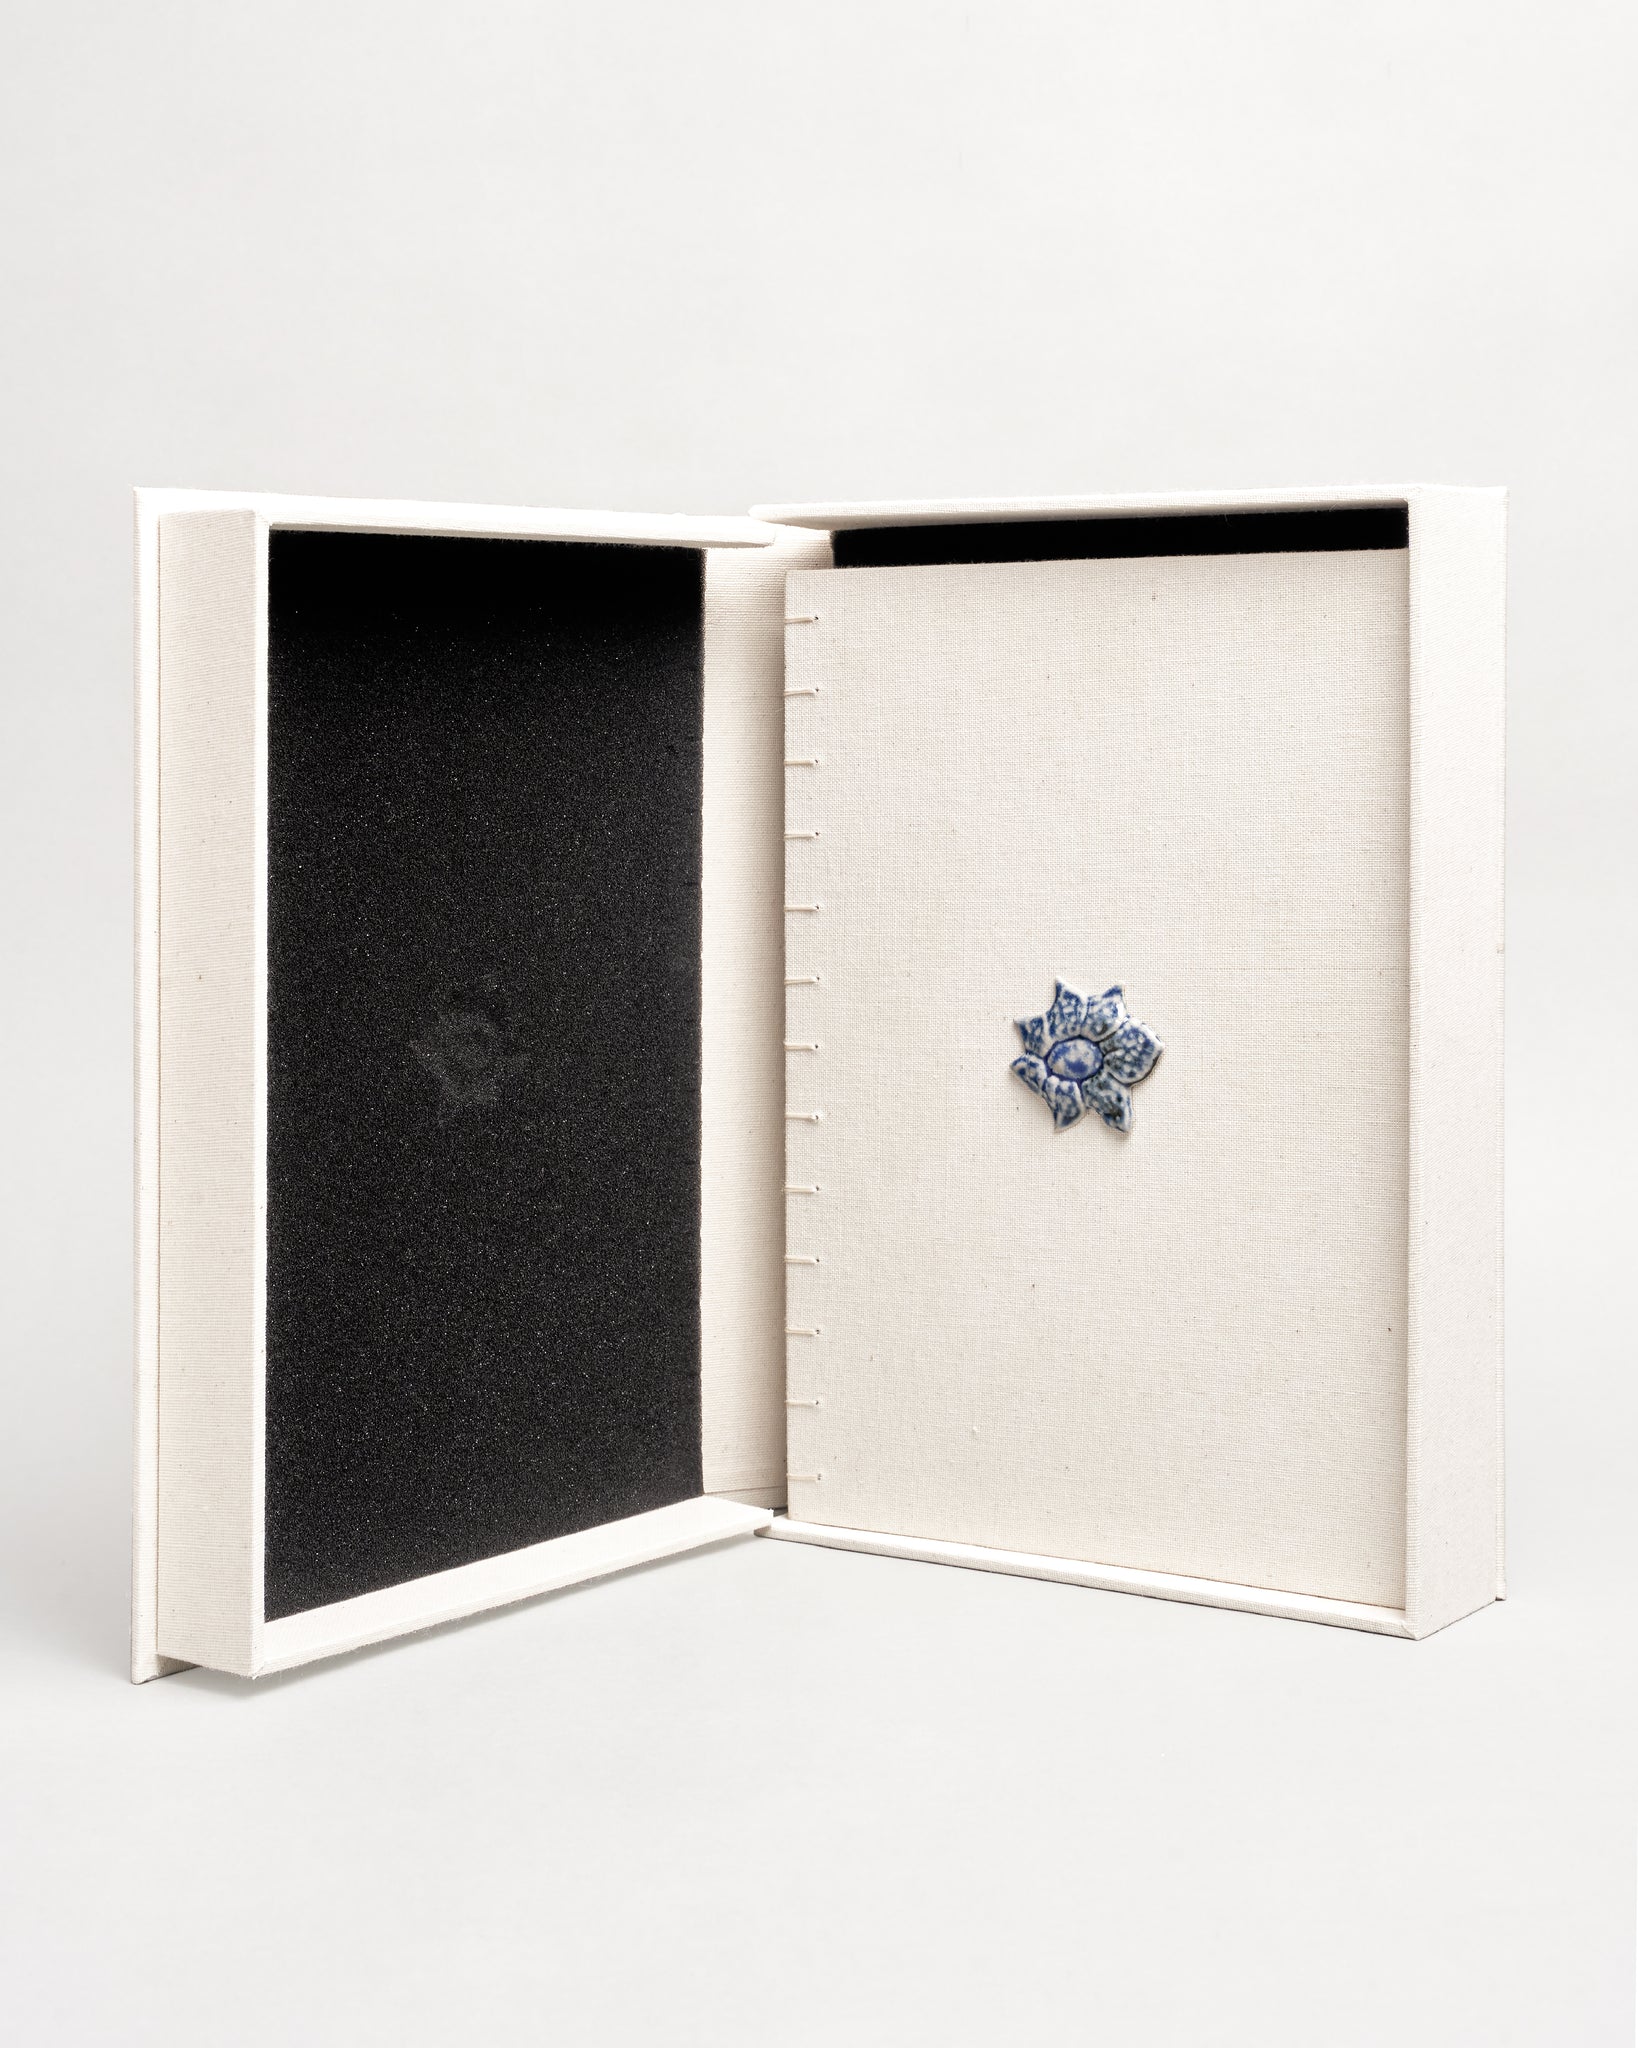 Pearl - Hand Bound Edition (PRE-ORDER)